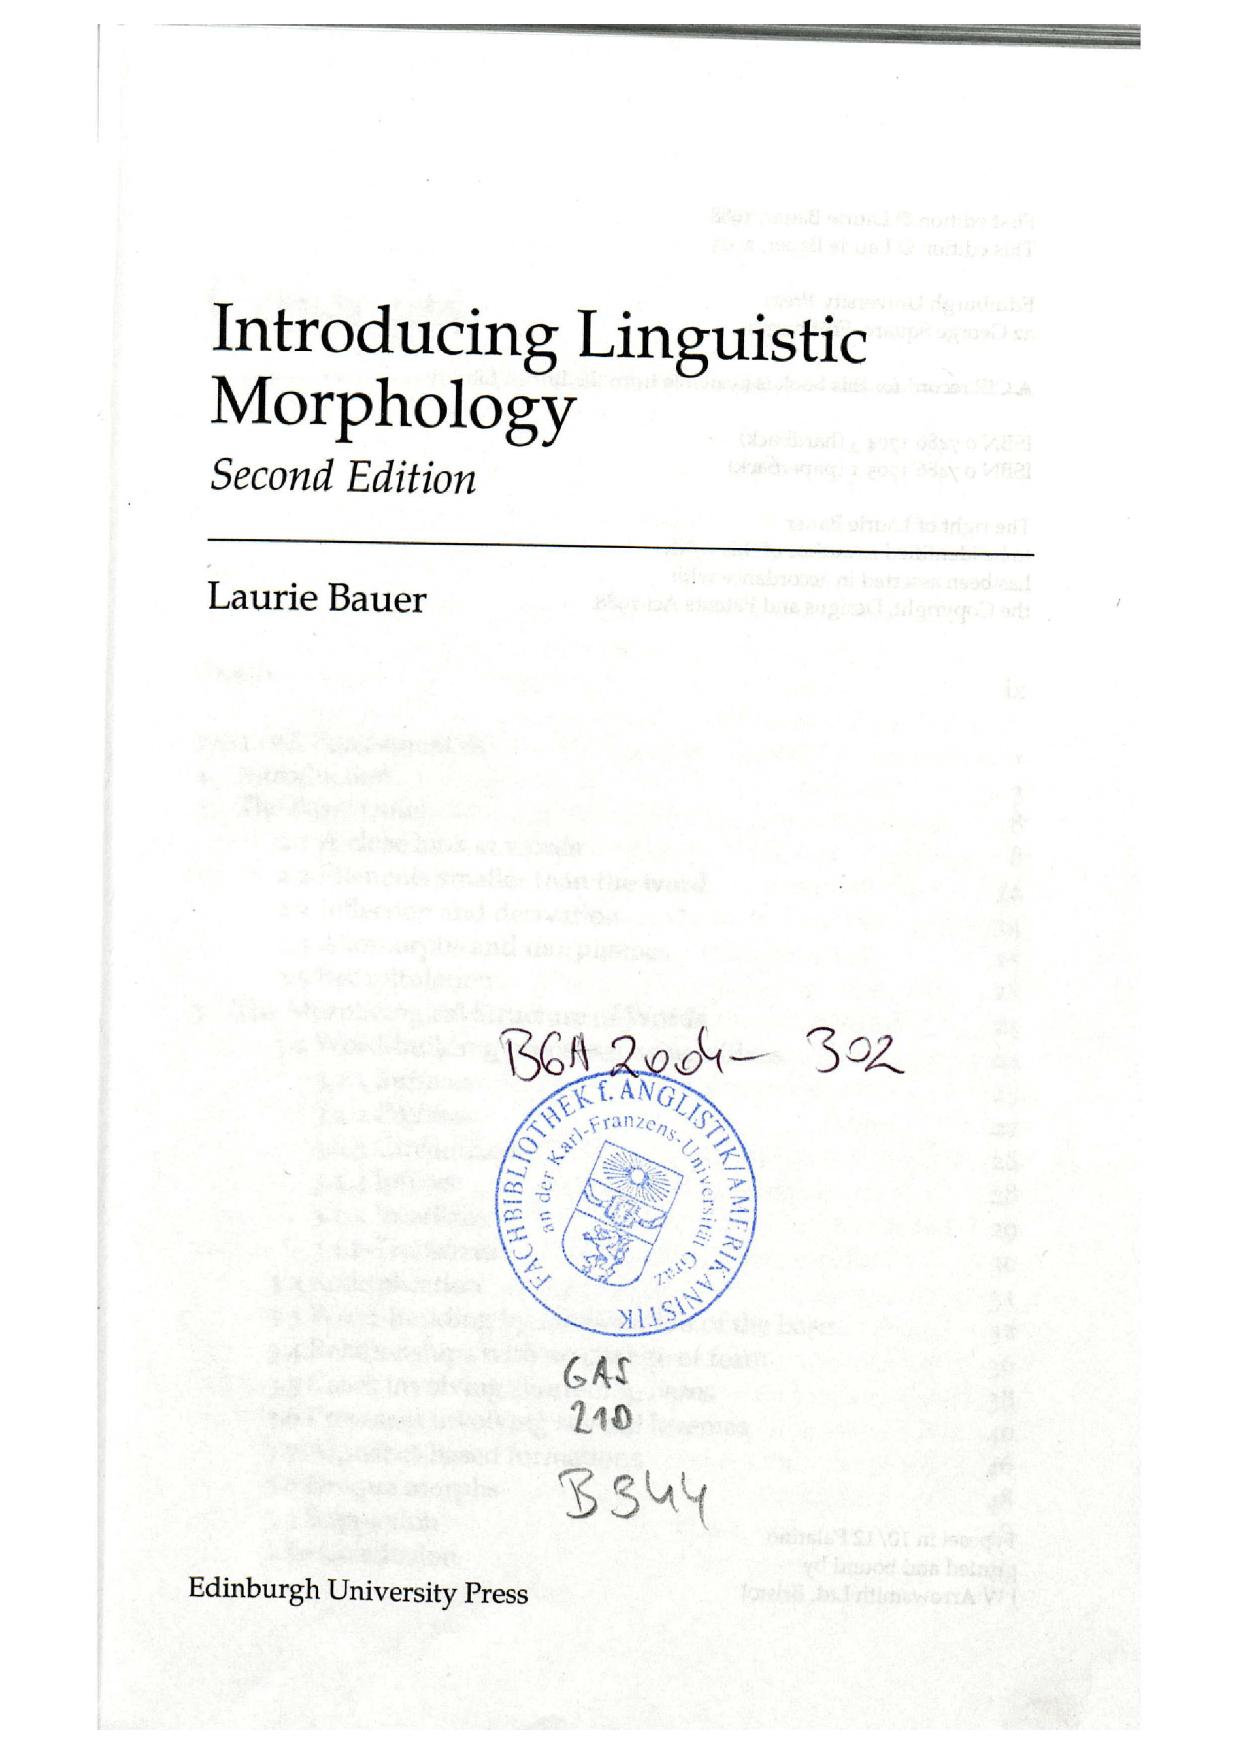 Introducing Linguistic Morphology by Bauer Laurie.